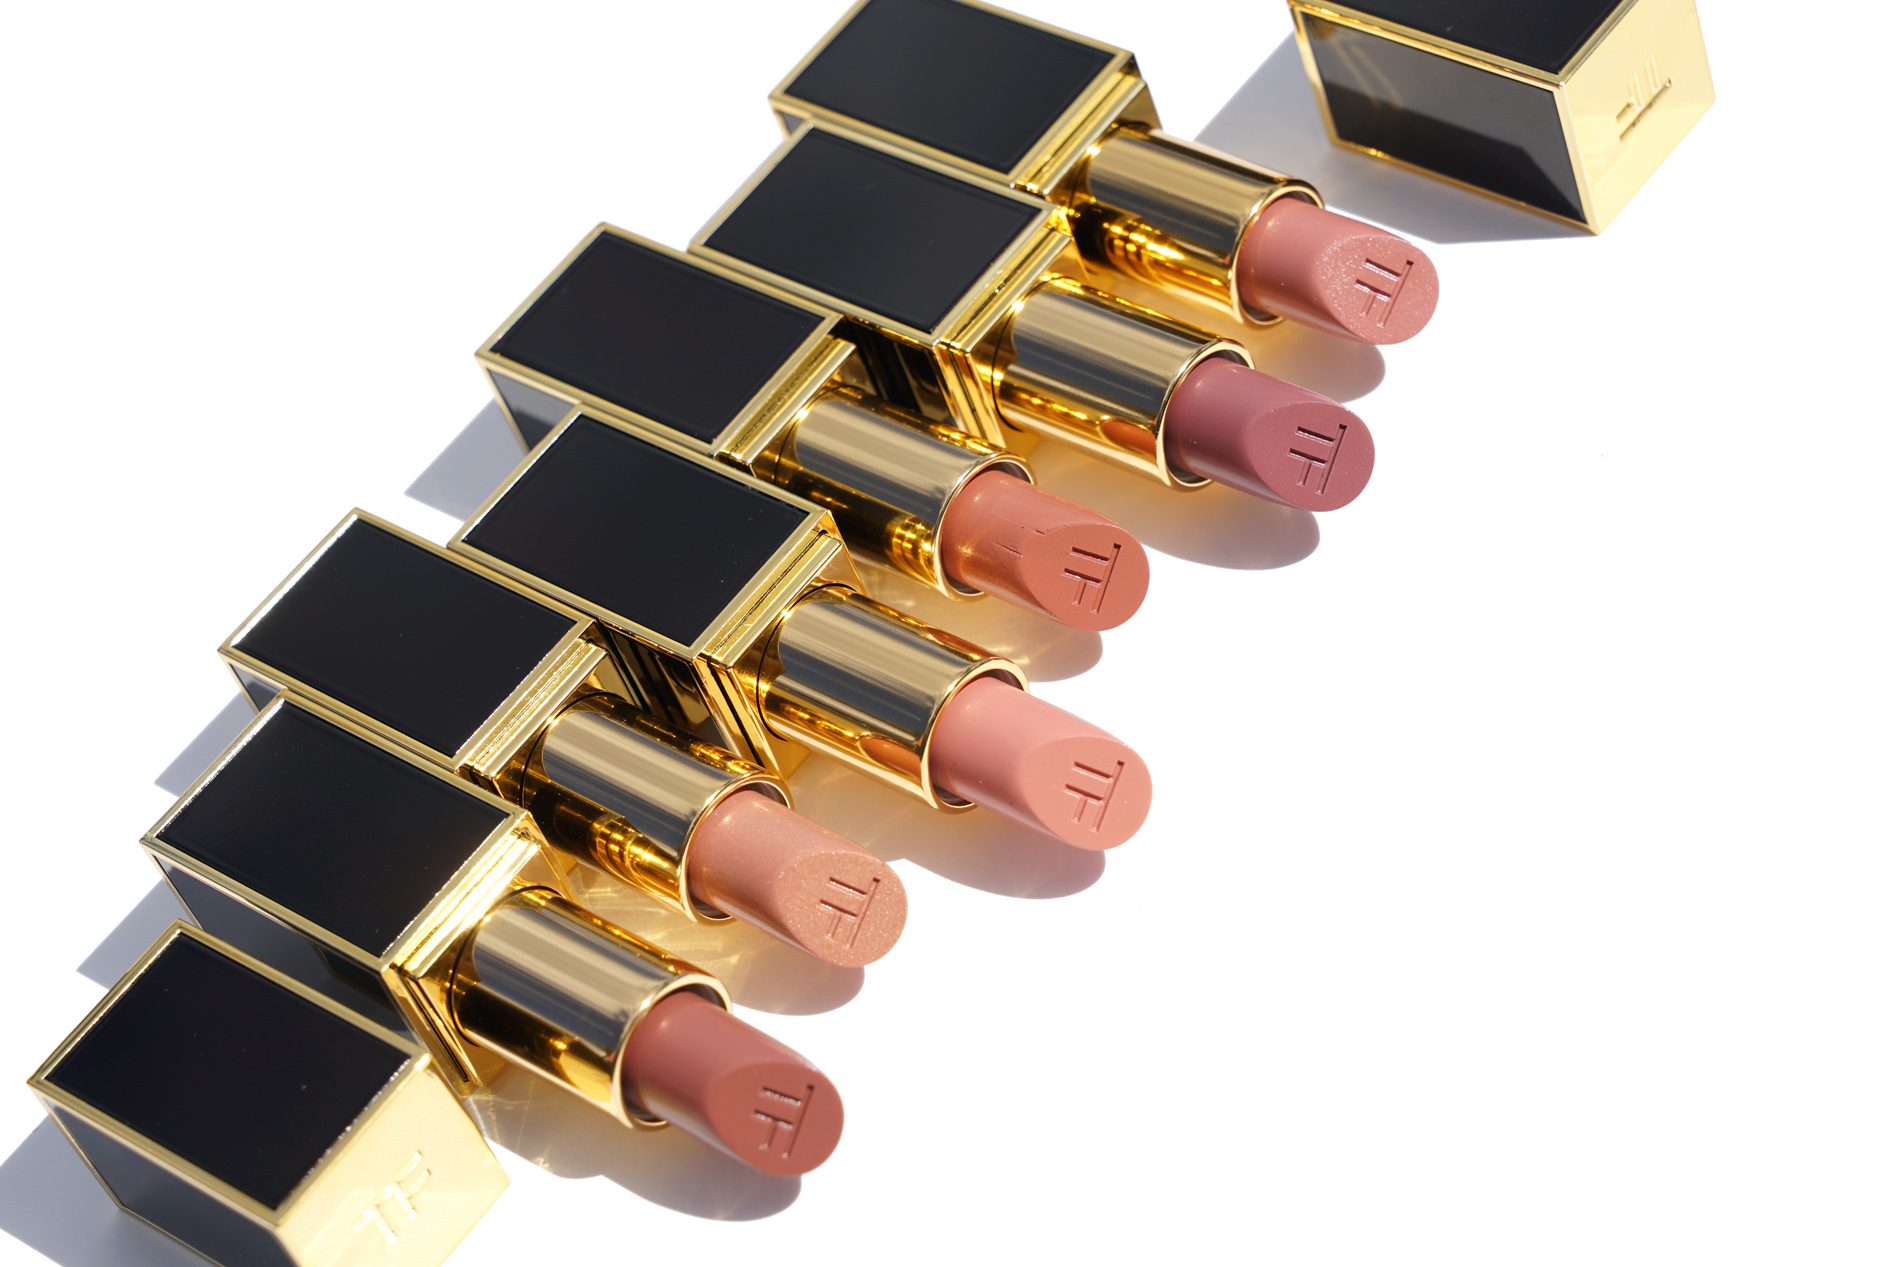 Swatches of the Tom Ford Lipsticks in Age of Consent, Spiced Honey